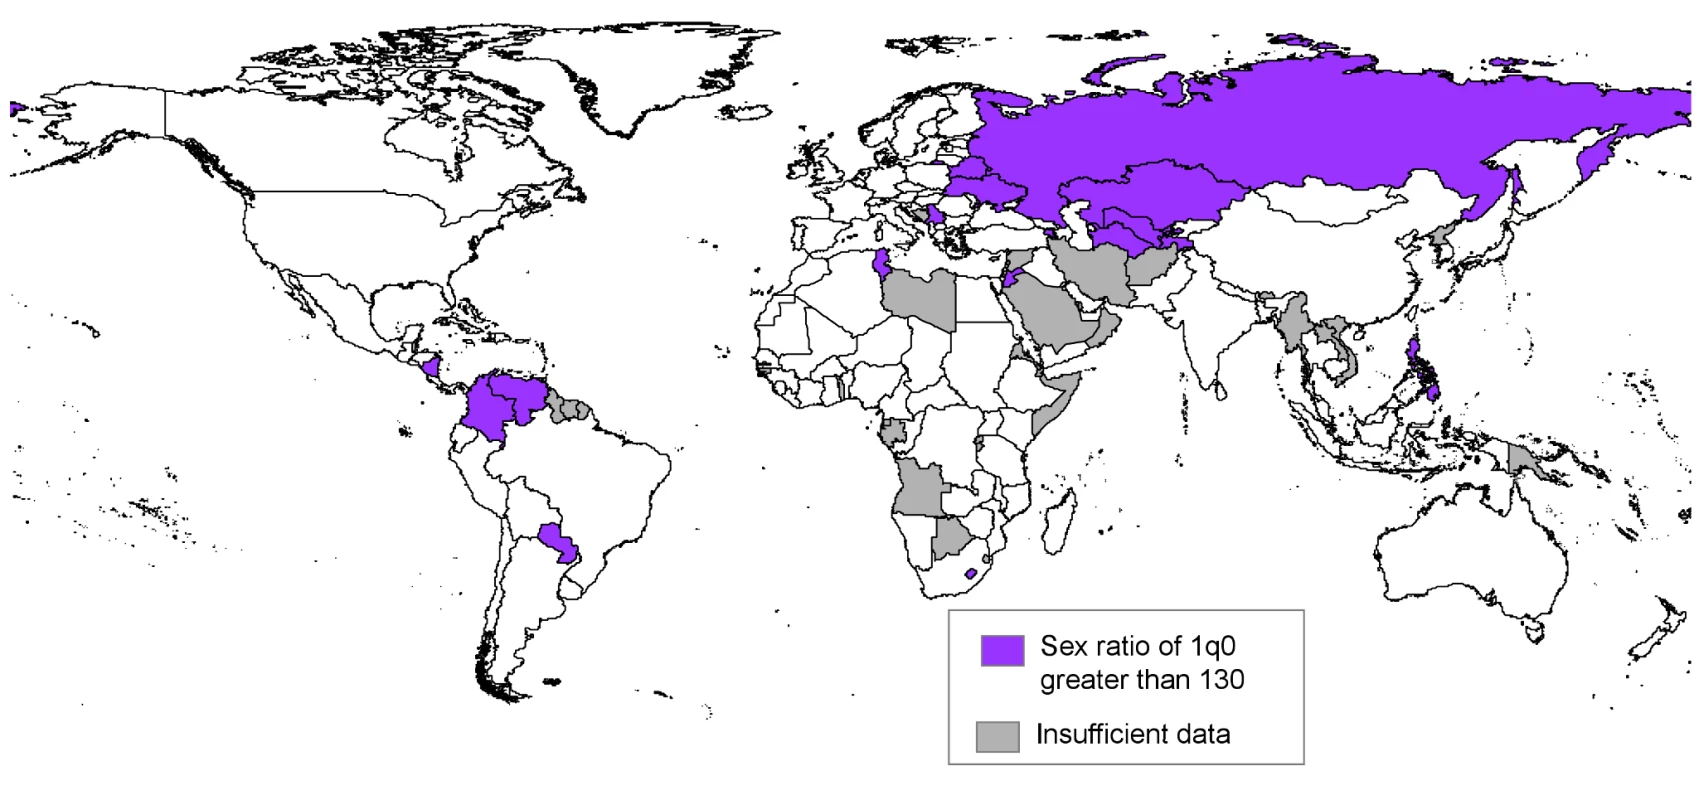 Countries where excess male infant mortality was found in the 2000s.